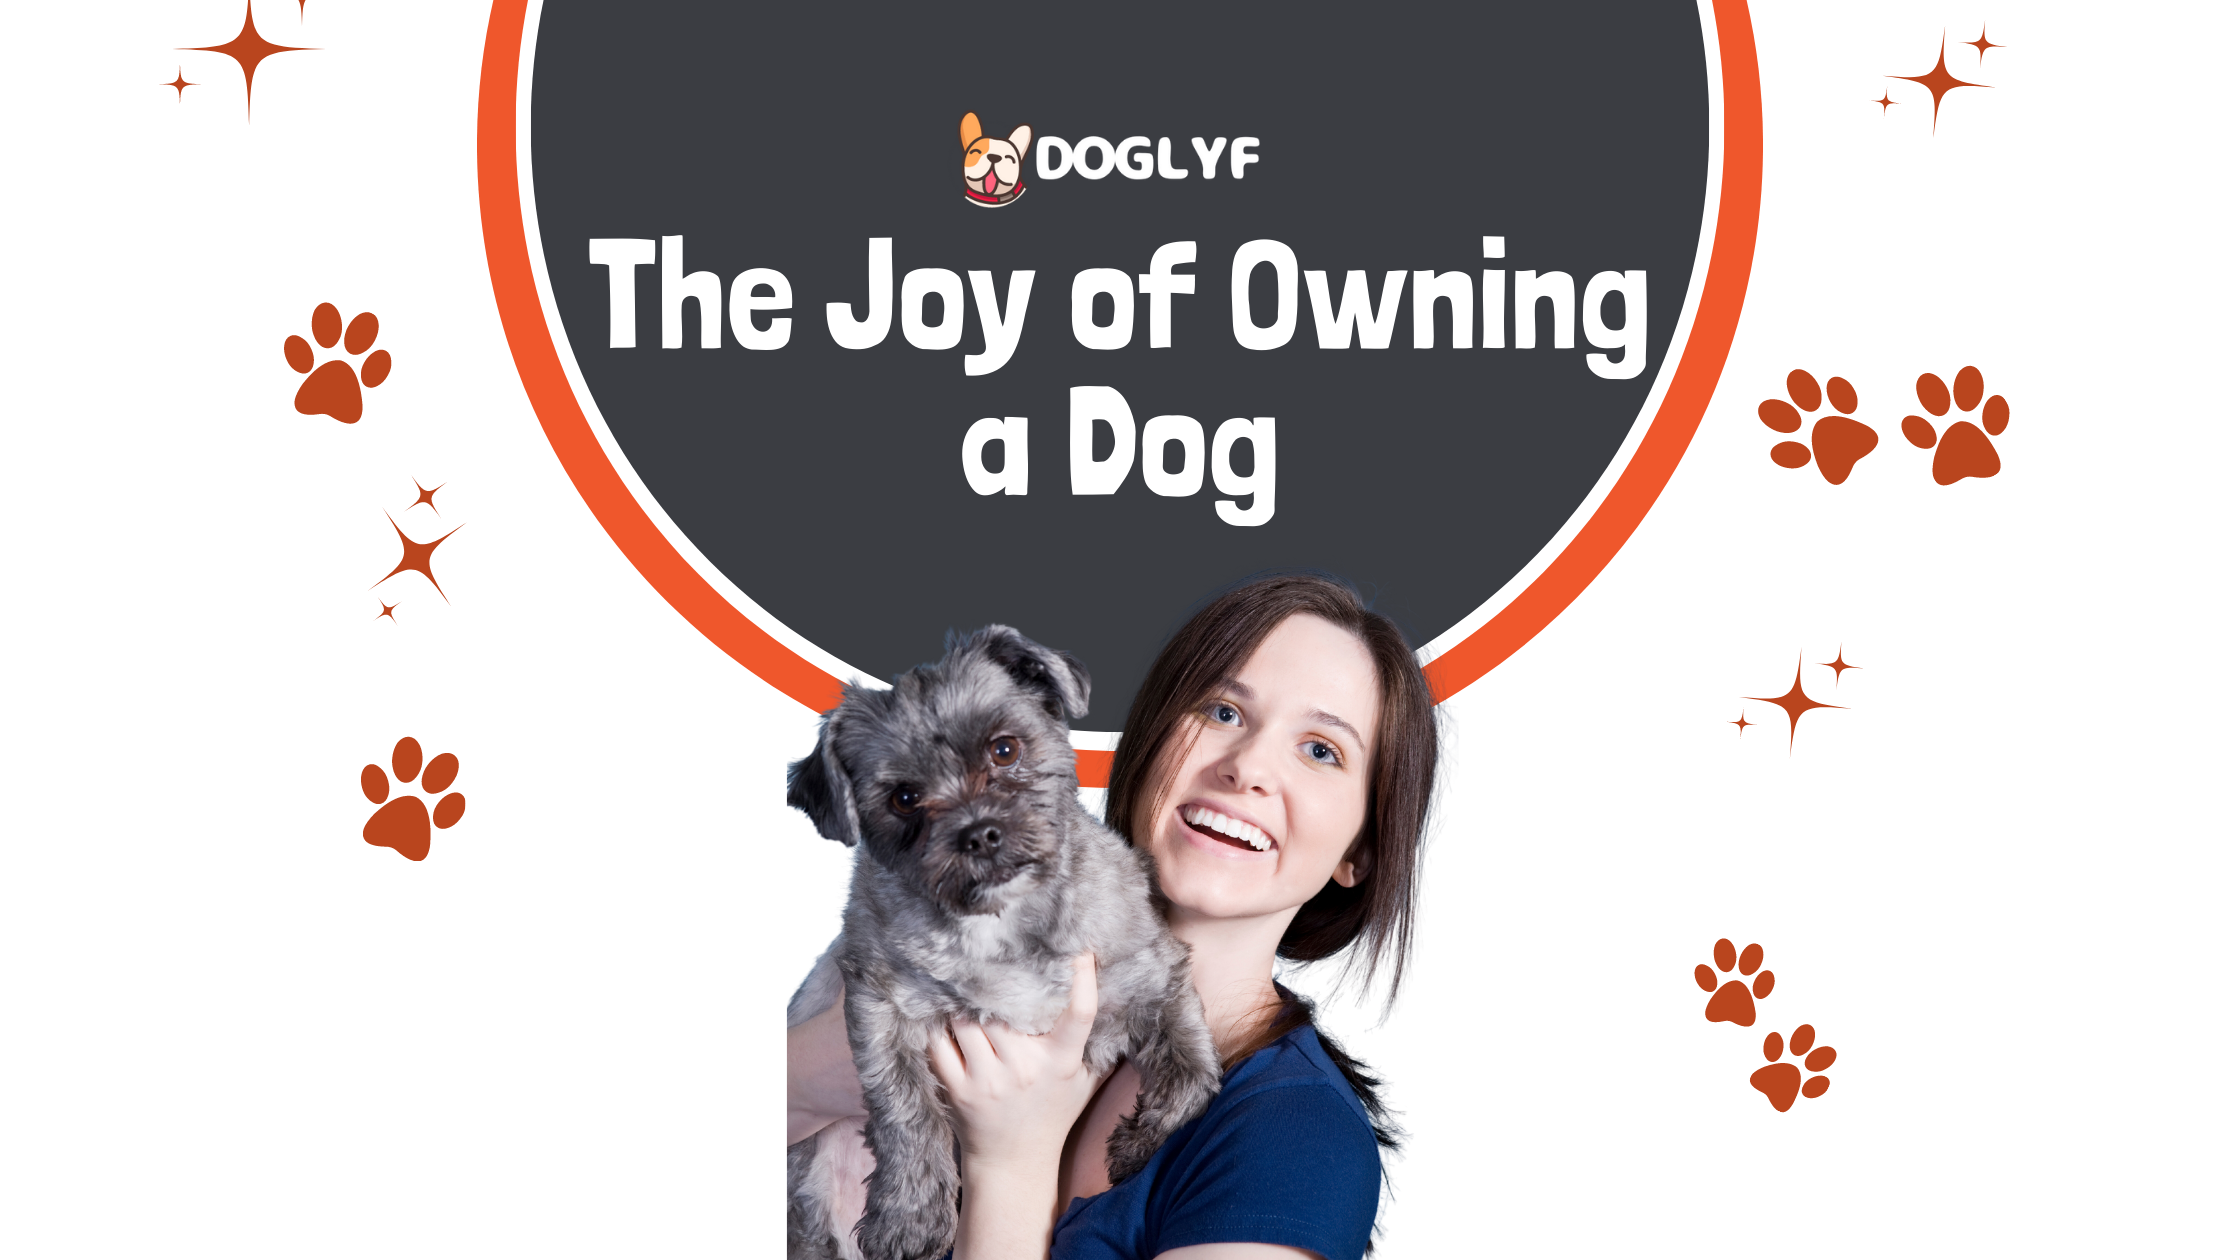 The Joy of Owning a Dog